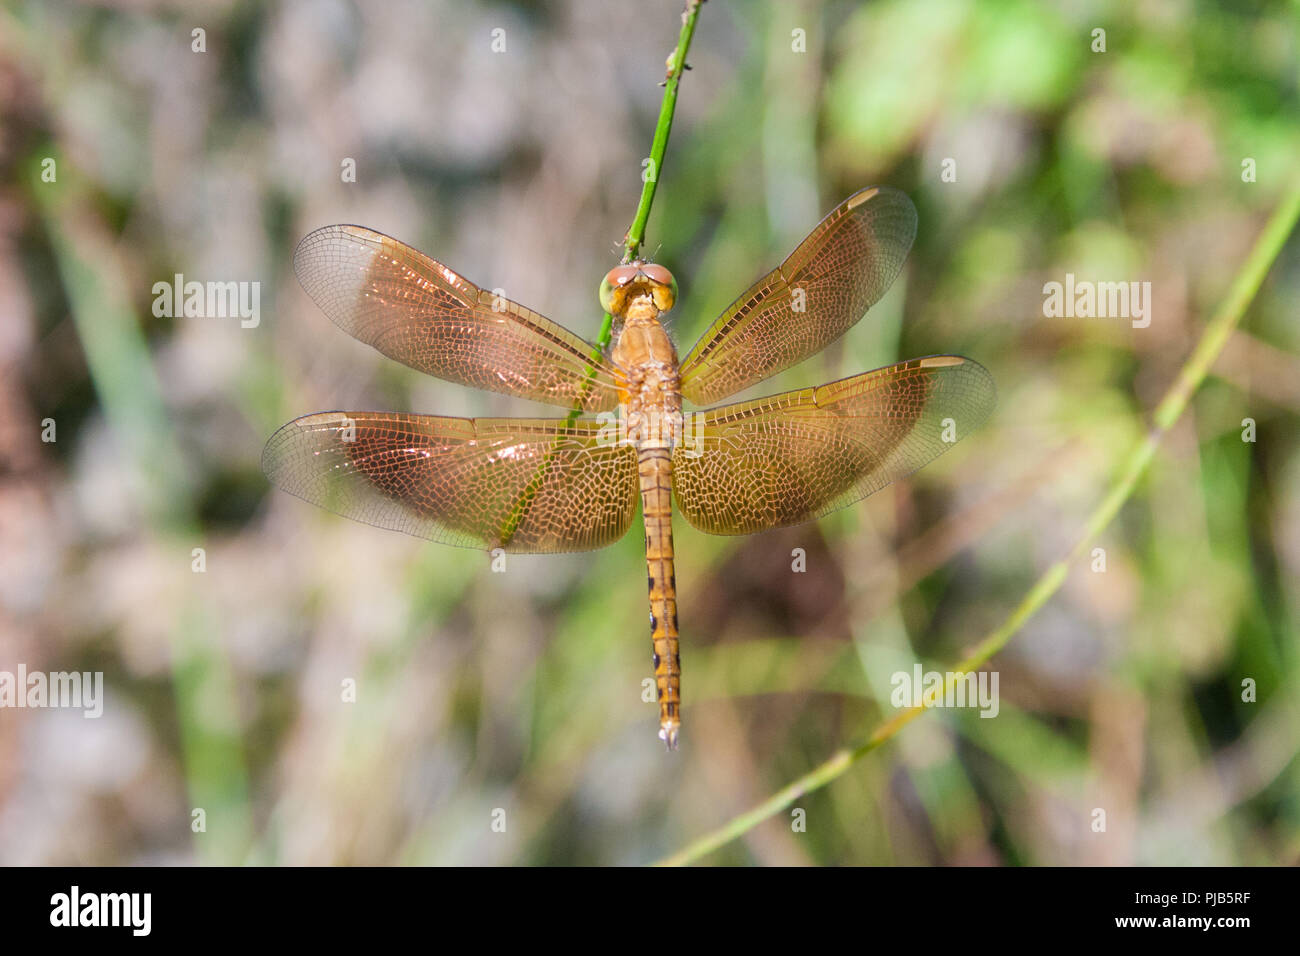 Close-up of a young male Grasshawk dragonfly (Neurothemis fluctuans). It has all the markings of the adult and the beautiful colouration to the wings,... Stock Photo